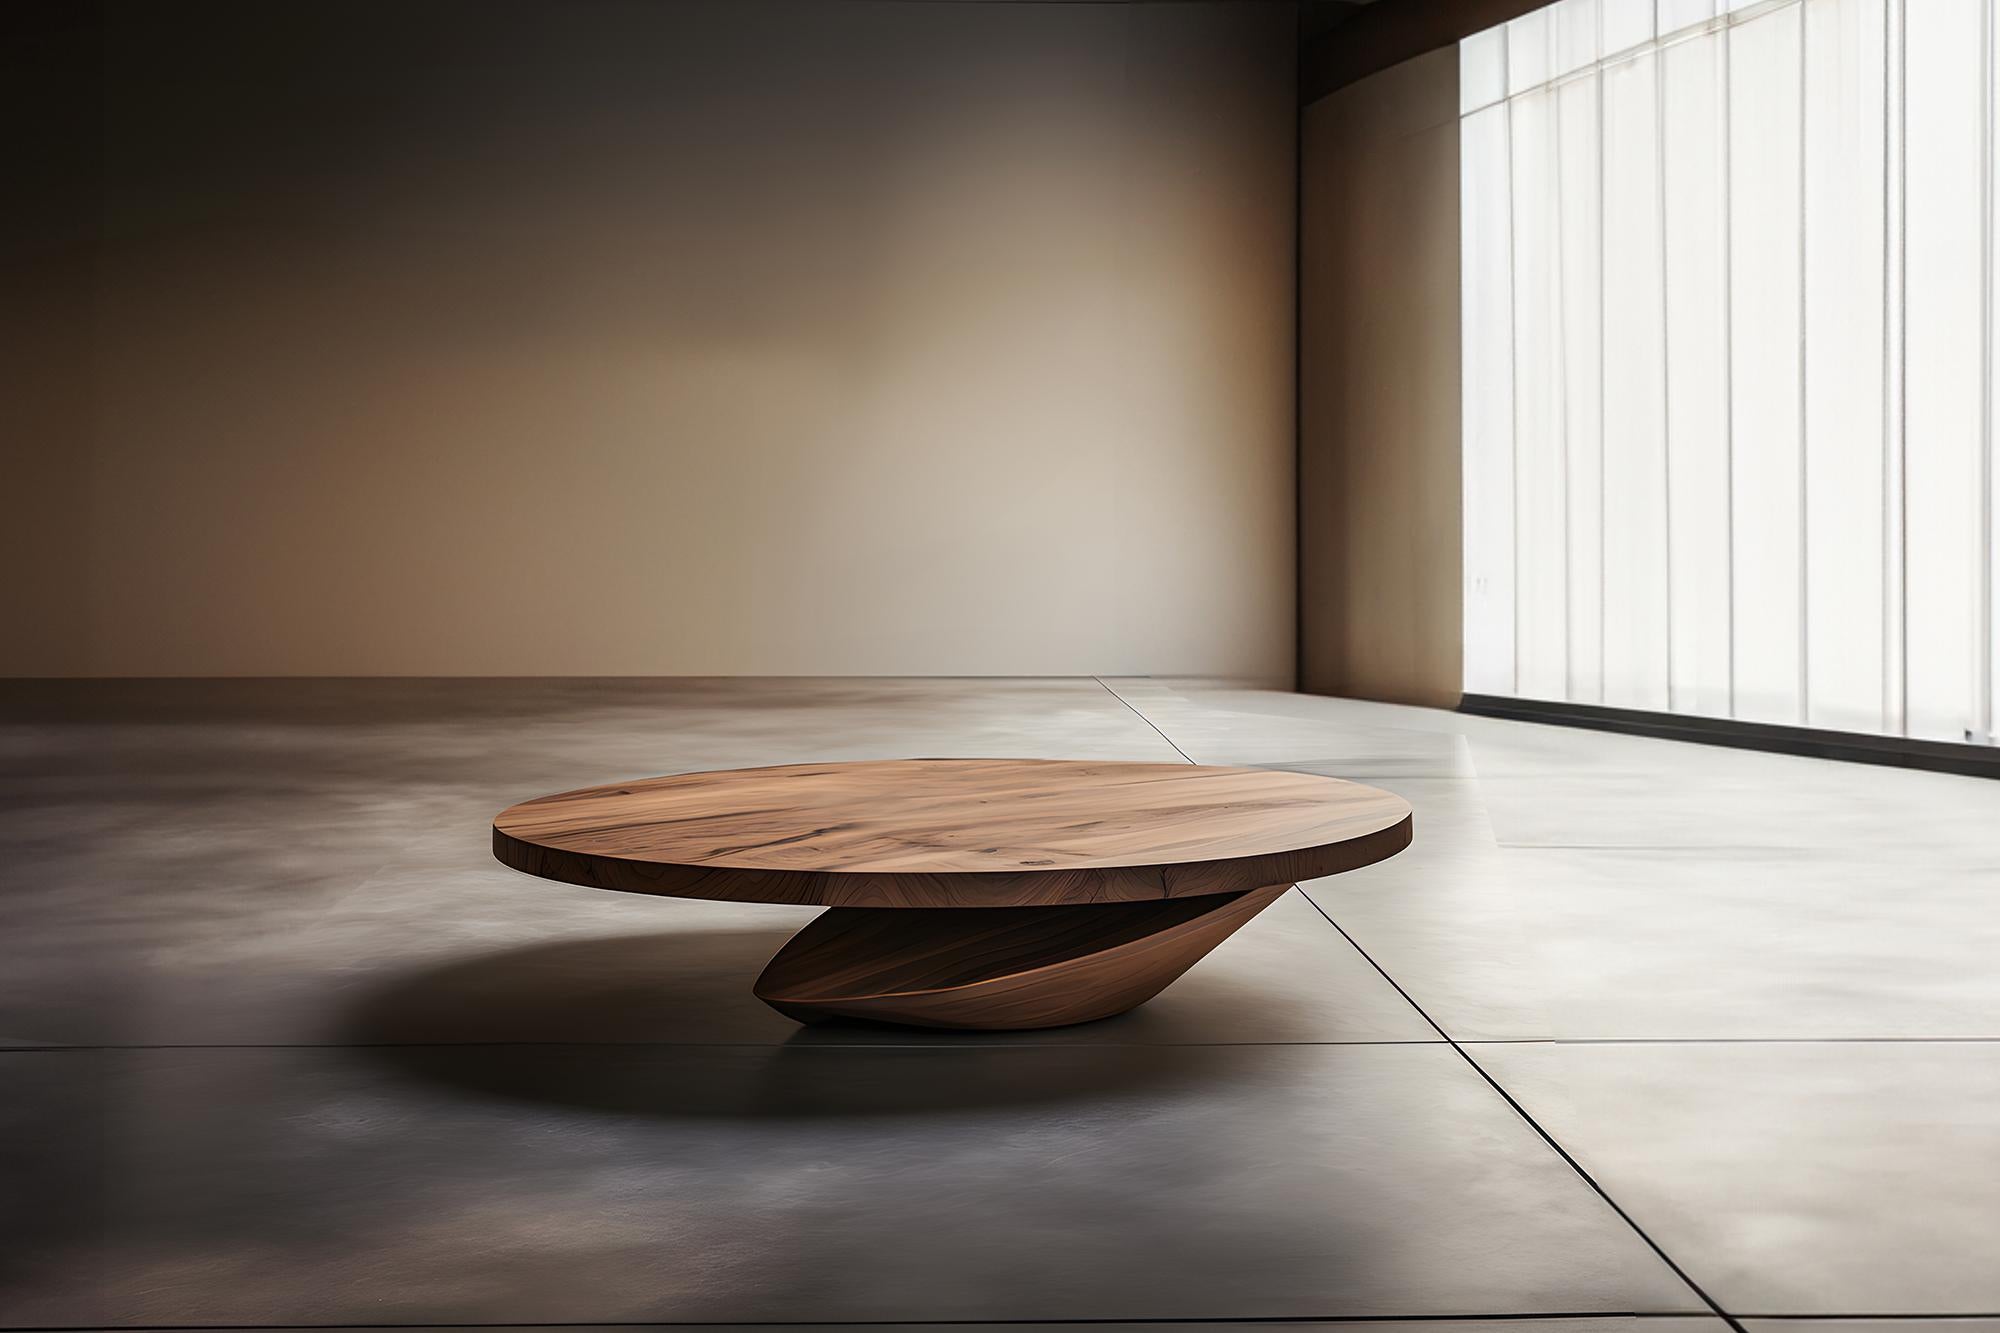 Sculptural Coffee Table Made of Solid Wood, Center Table Solace S44 by Joel Escalona


The Solace table series, designed by Joel Escalona, is a furniture collection that exudes balance and presence, thanks to its sensuous, dense, and irregular